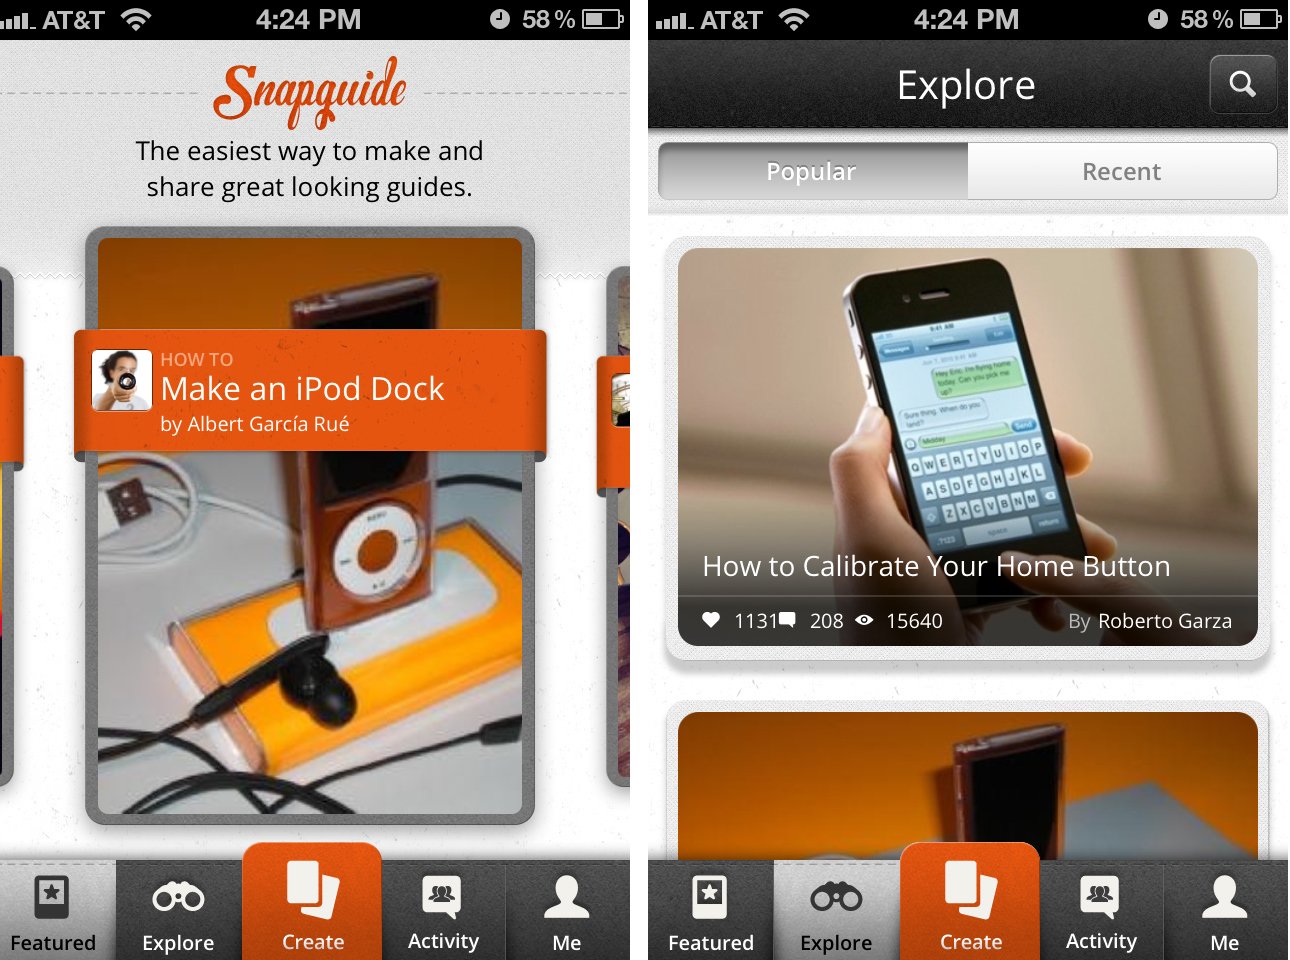 Browse and search tons of DIY guides with Snapguide for iPhone